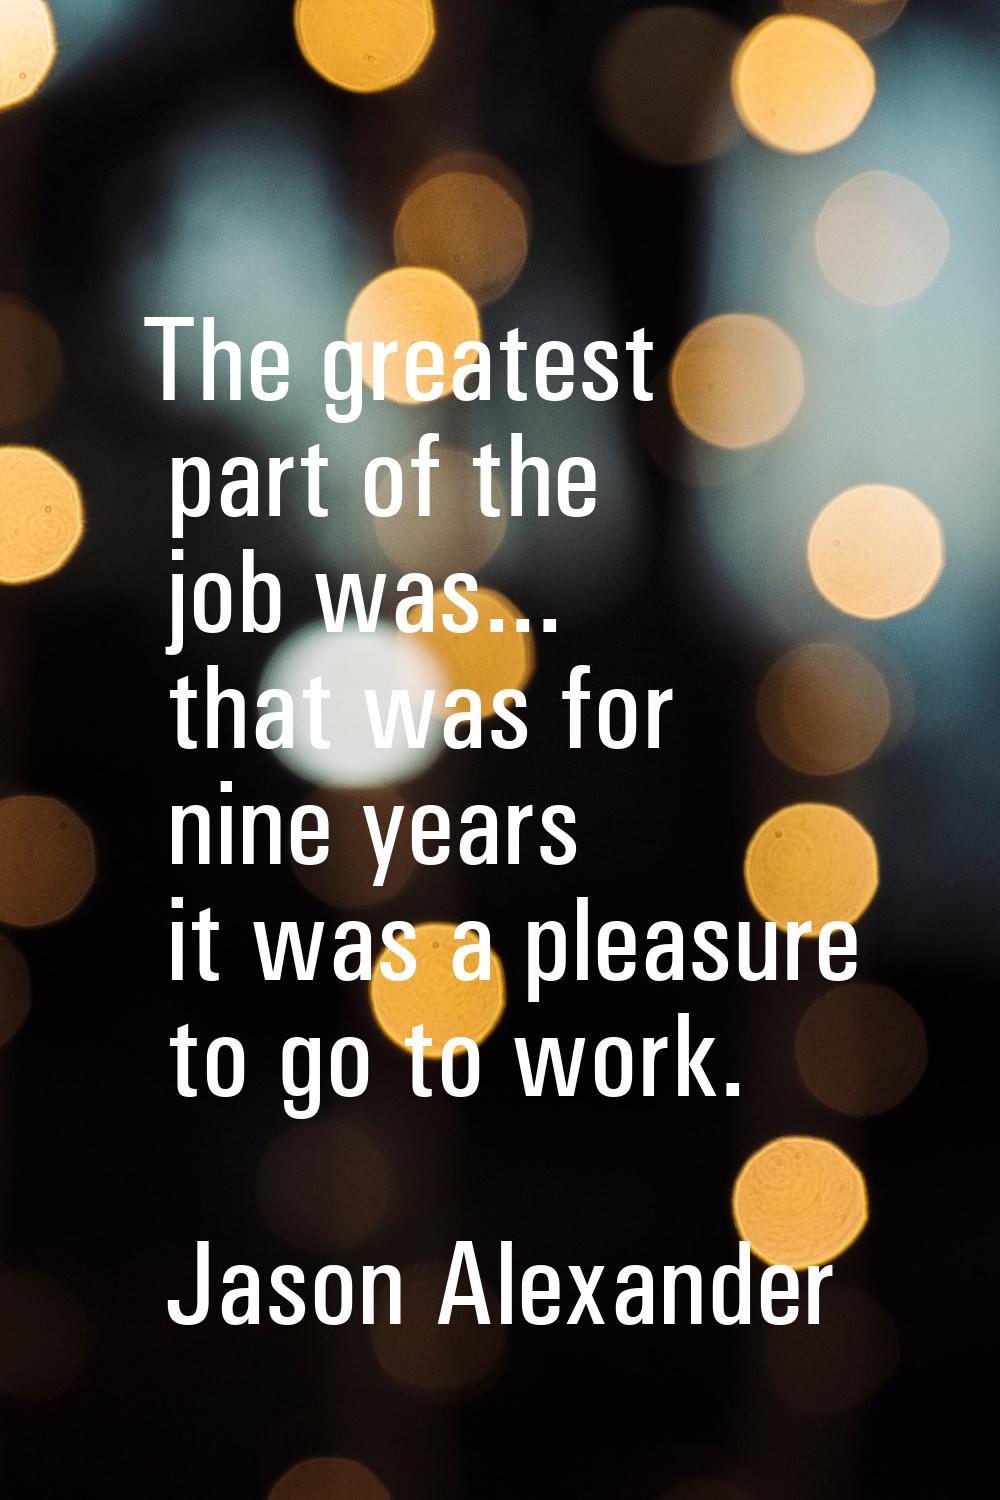 The greatest part of the job was... that was for nine years it was a pleasure to go to work.